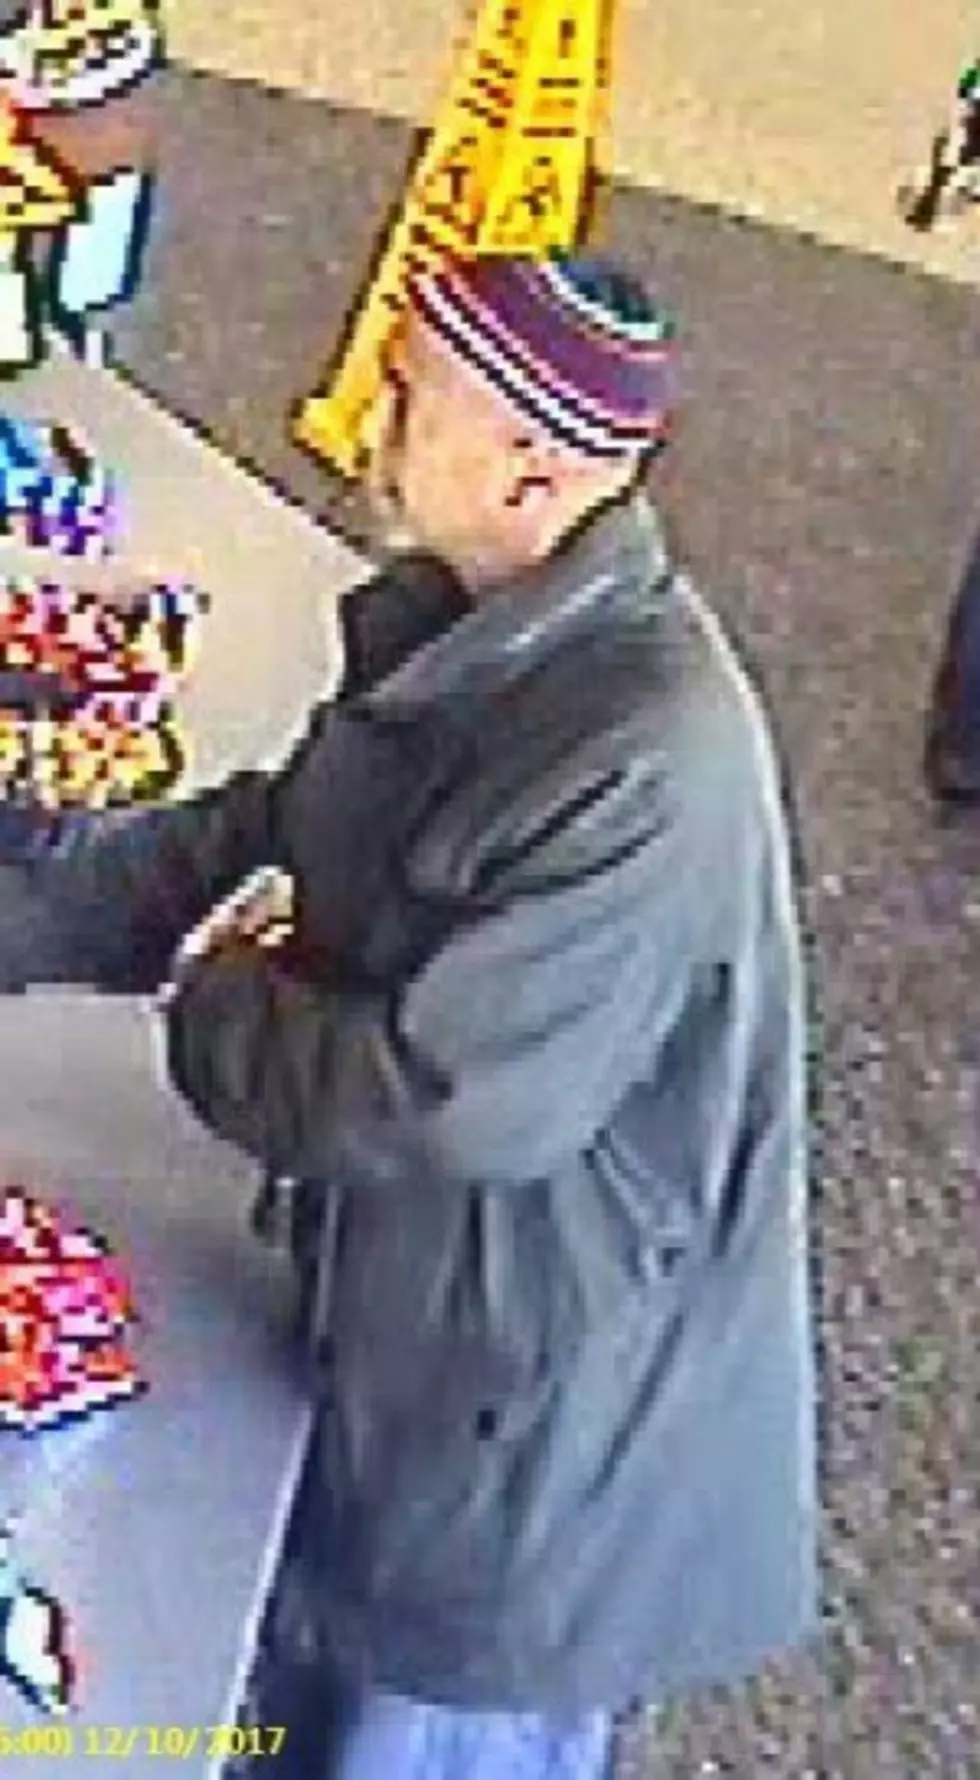 Galloway Township Police seek public’s help finding theft suspect